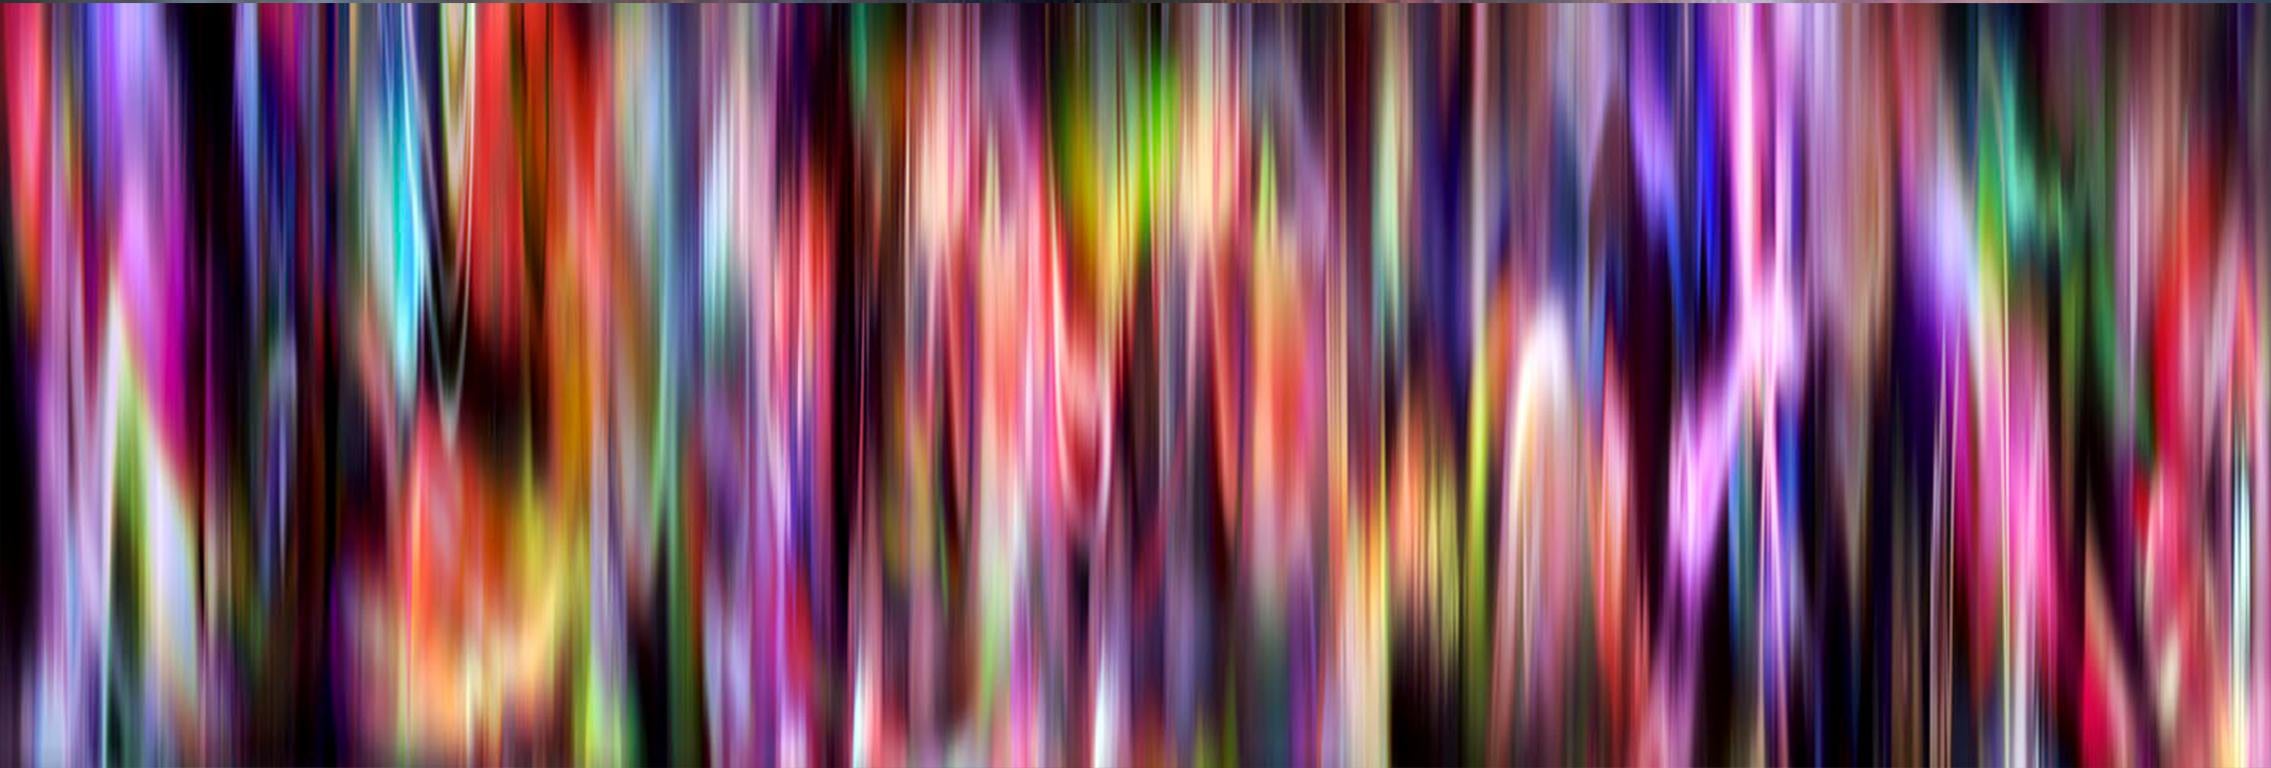 Equa Light, Abstracts